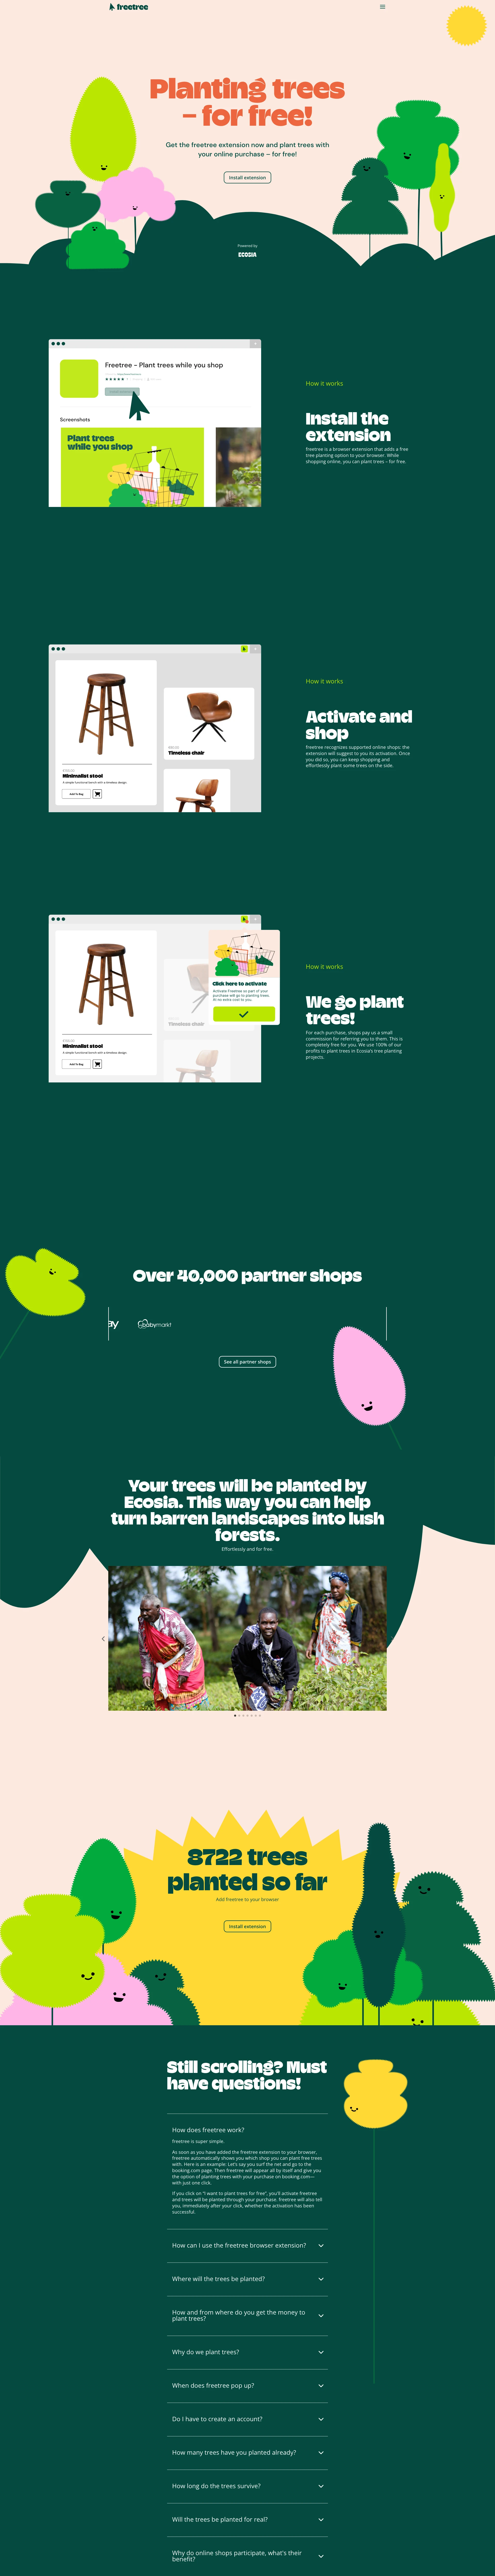 freetree Landing Page Example: Planting trees while shopping the web. This you can do with freetree. Just install the browser extension and let's plant trees together.